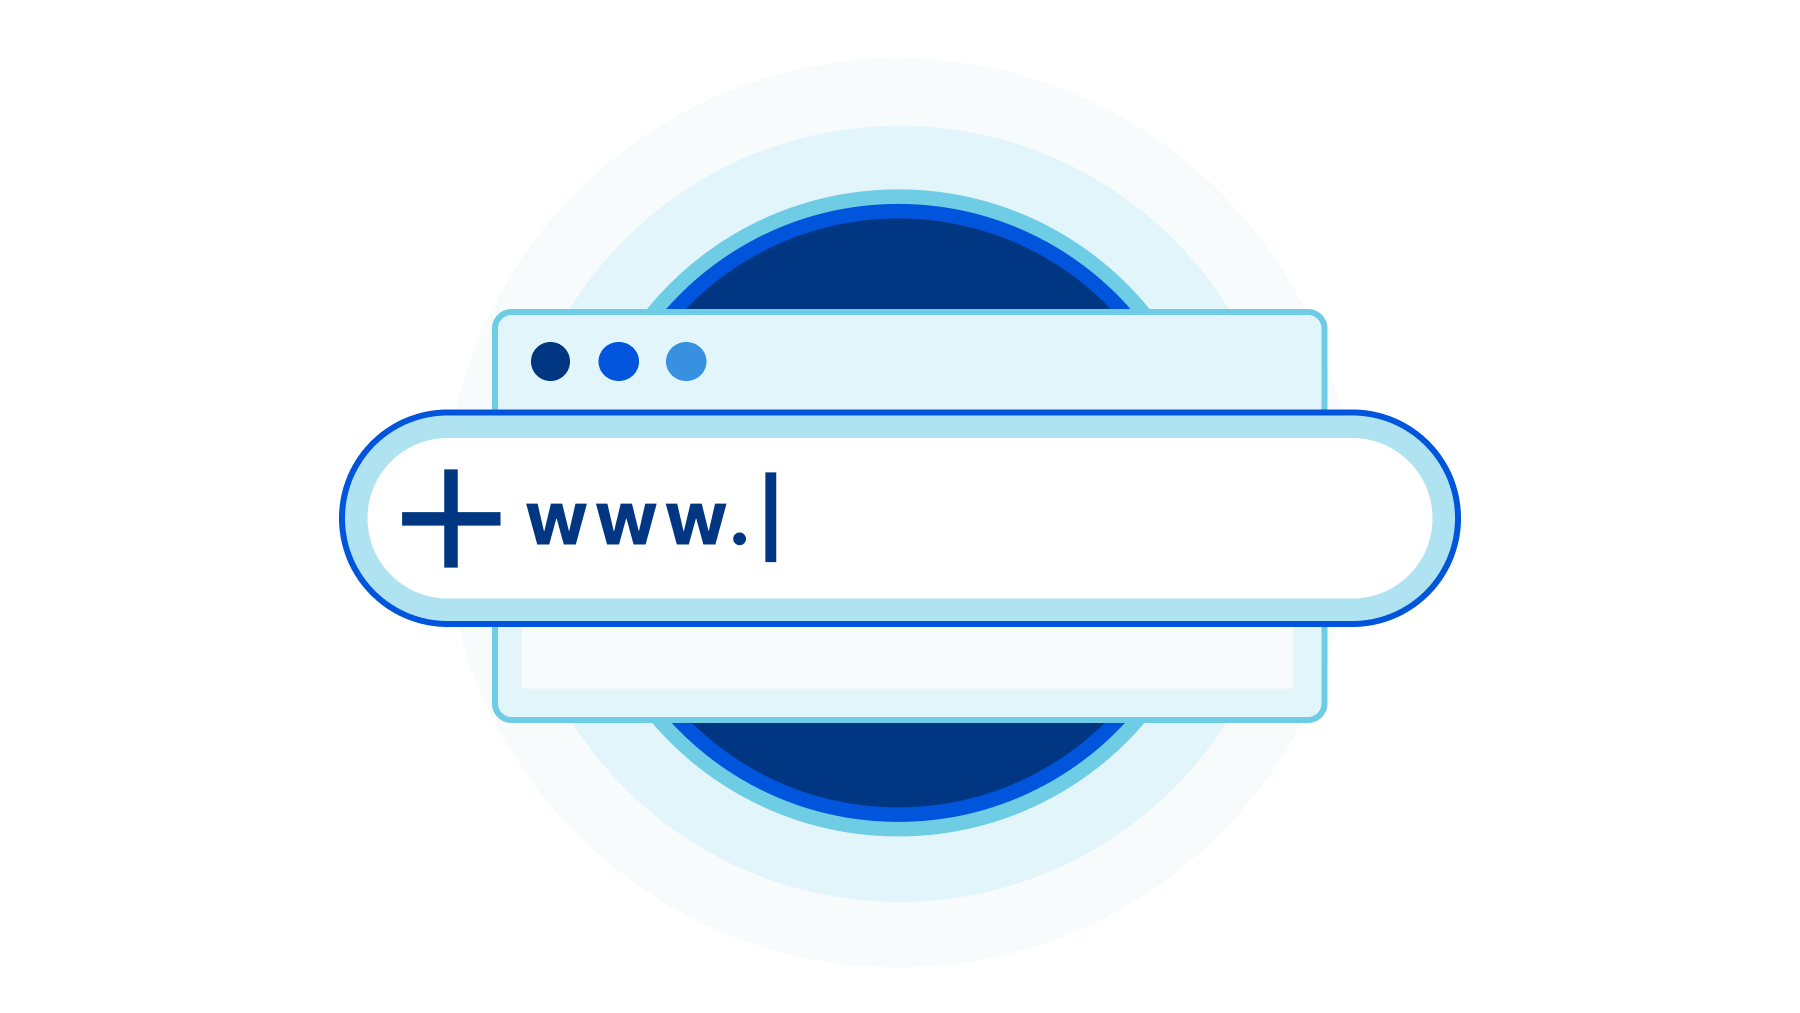 We’re excited to announce that all customers now have the ability to register new domains.